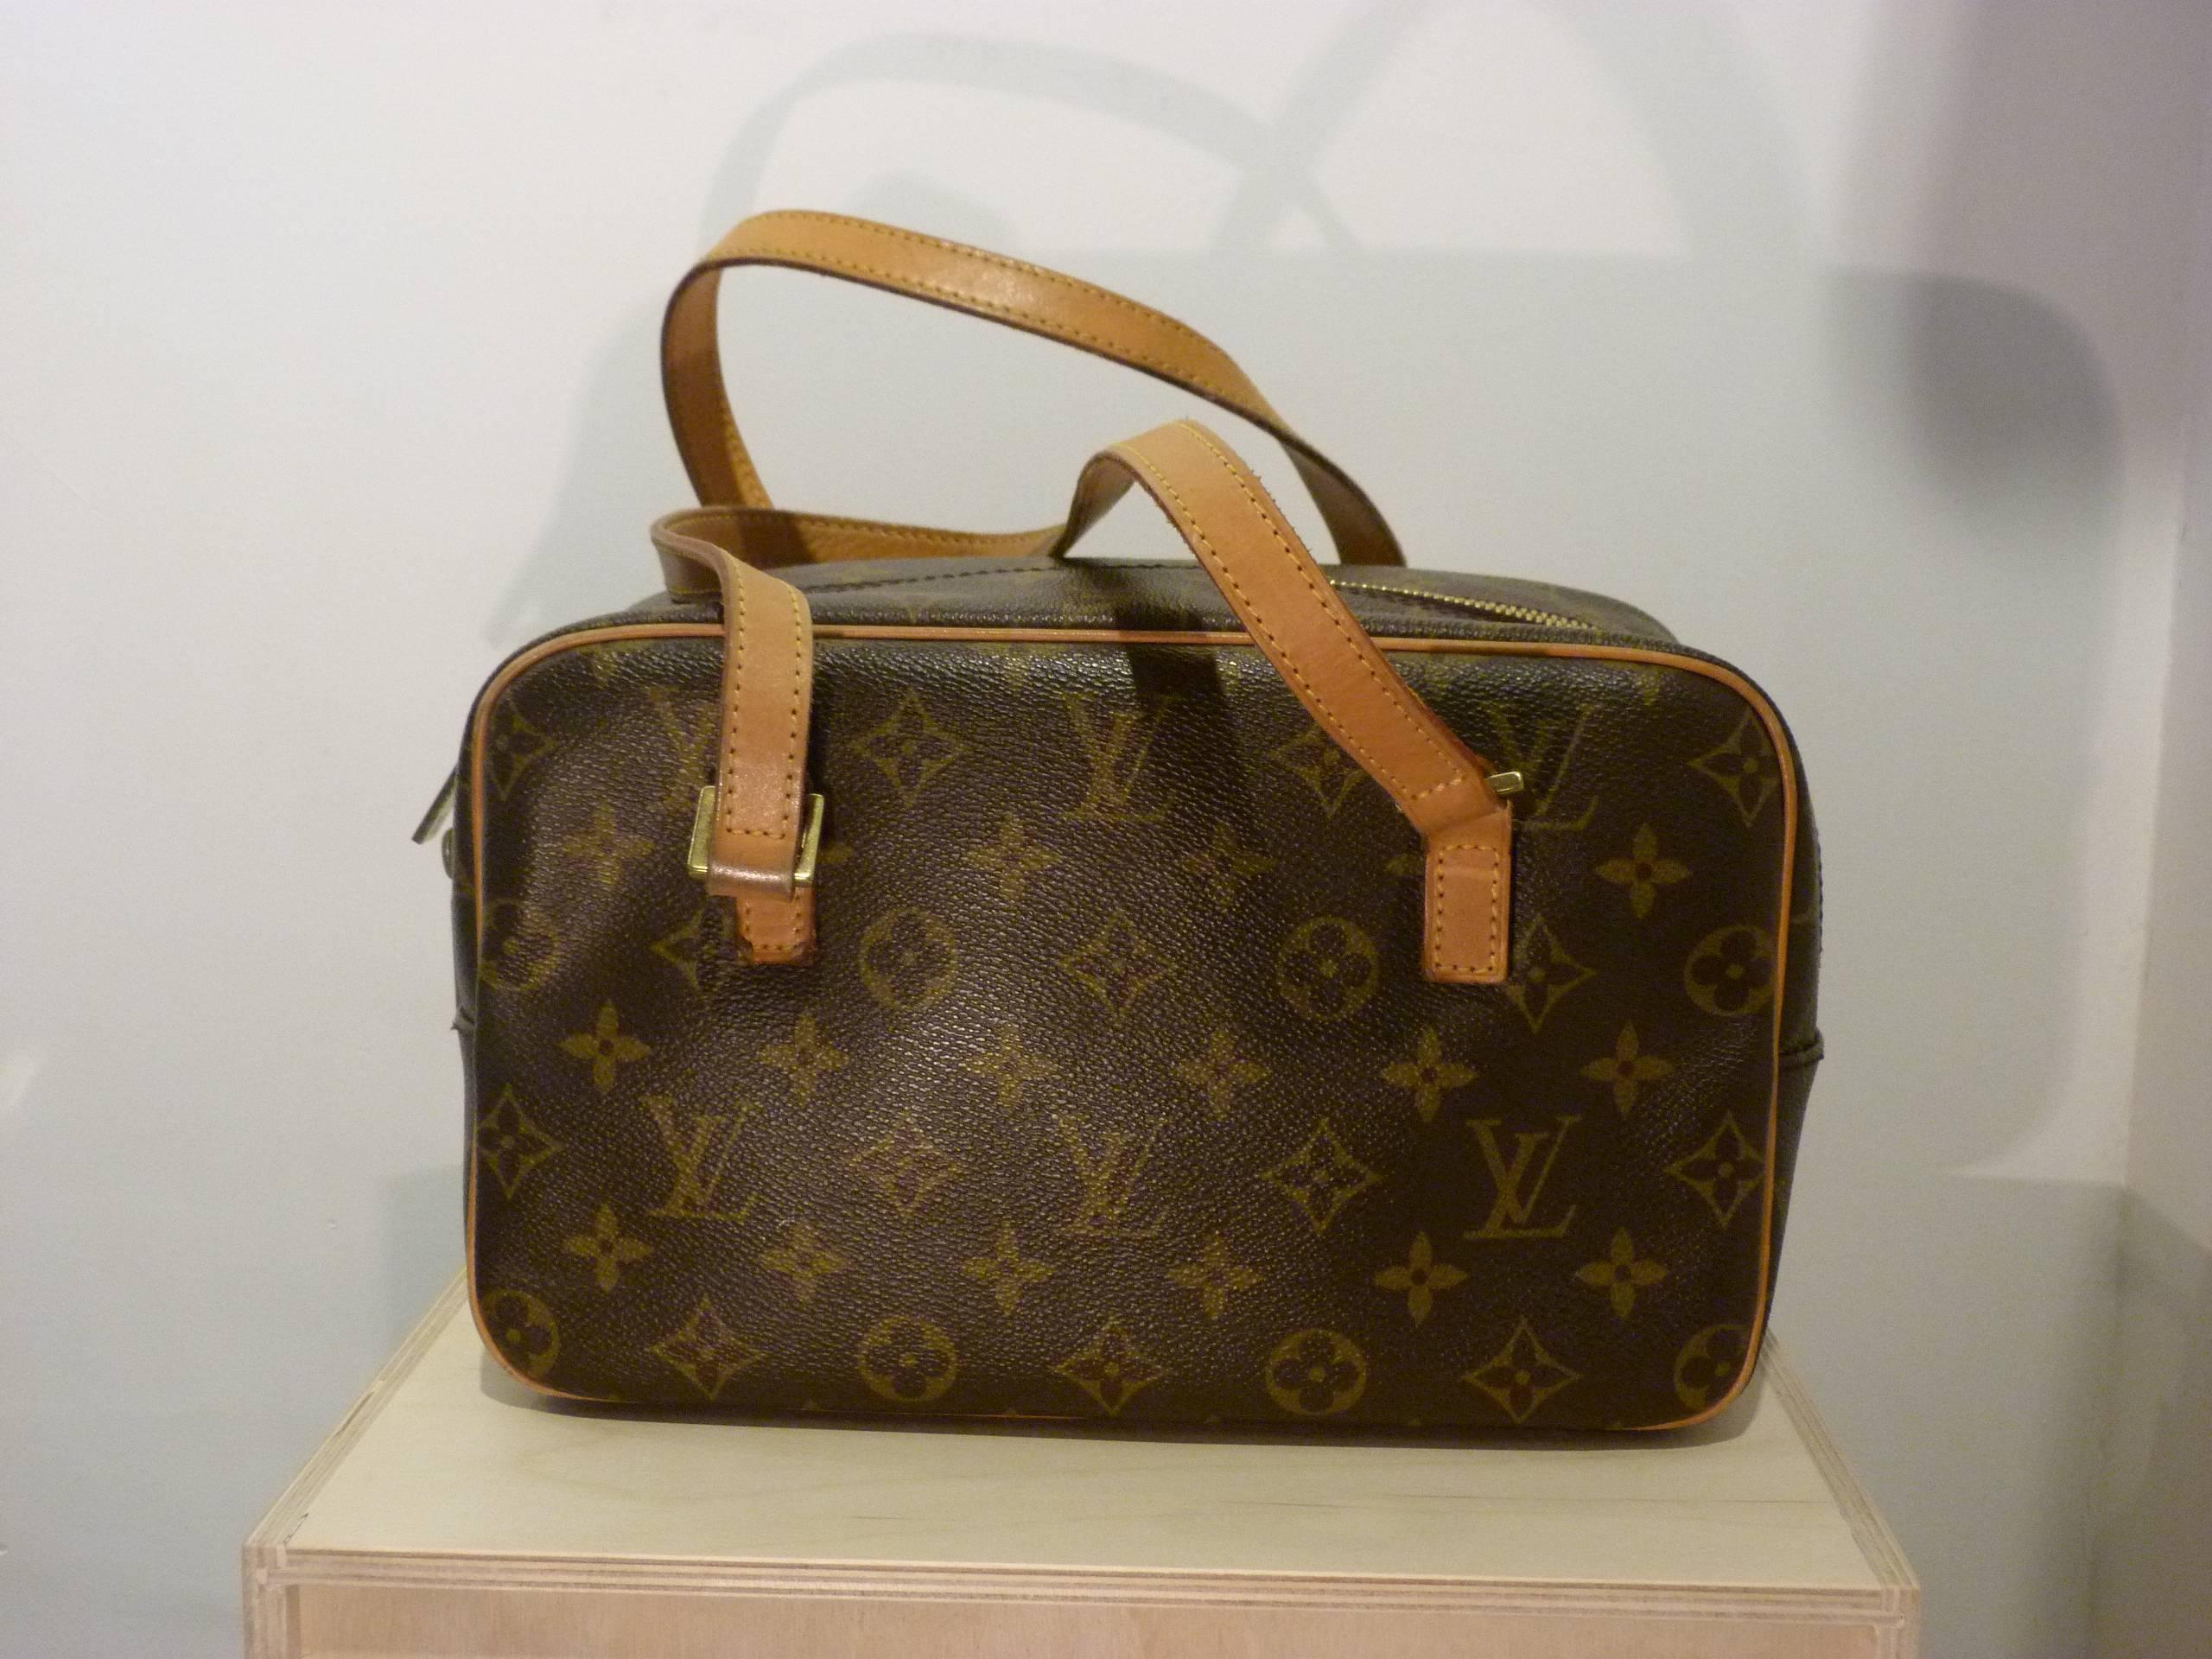 Louis Vuitton monogram handbag in natural leather.  On the front of the bag there is a zipped pocket, two handles that allow you to wear your bag on your shoulder and one principal zipped pocket. Also, 3 pockets on the interior.
Some sign of wear